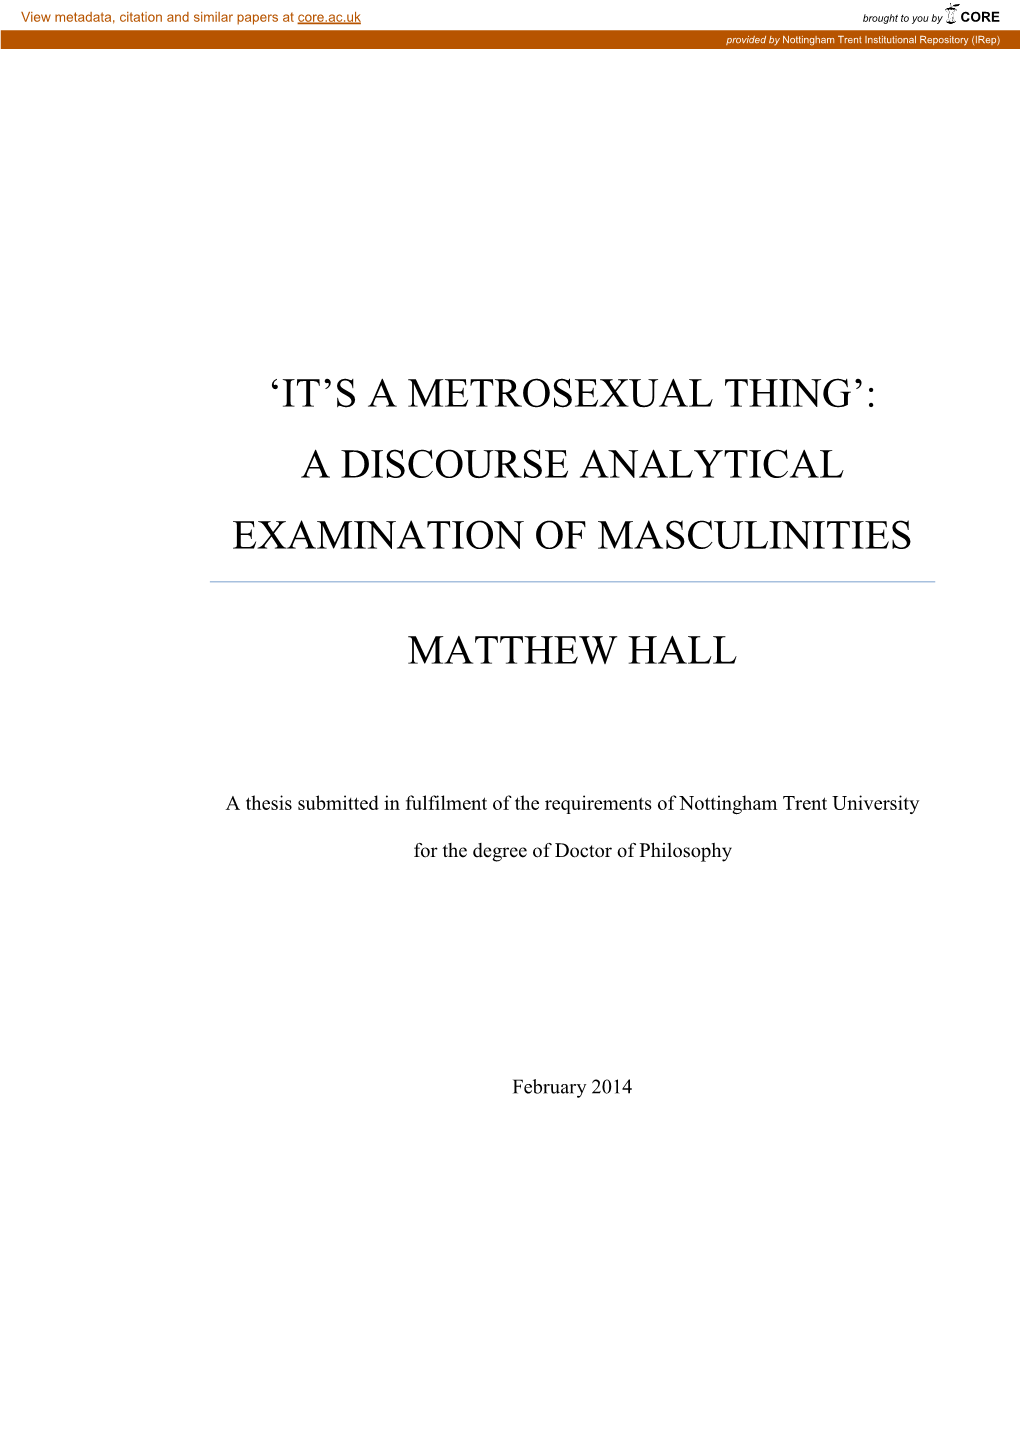 'Metrosexual' Masculinity: a Discourse Analysis